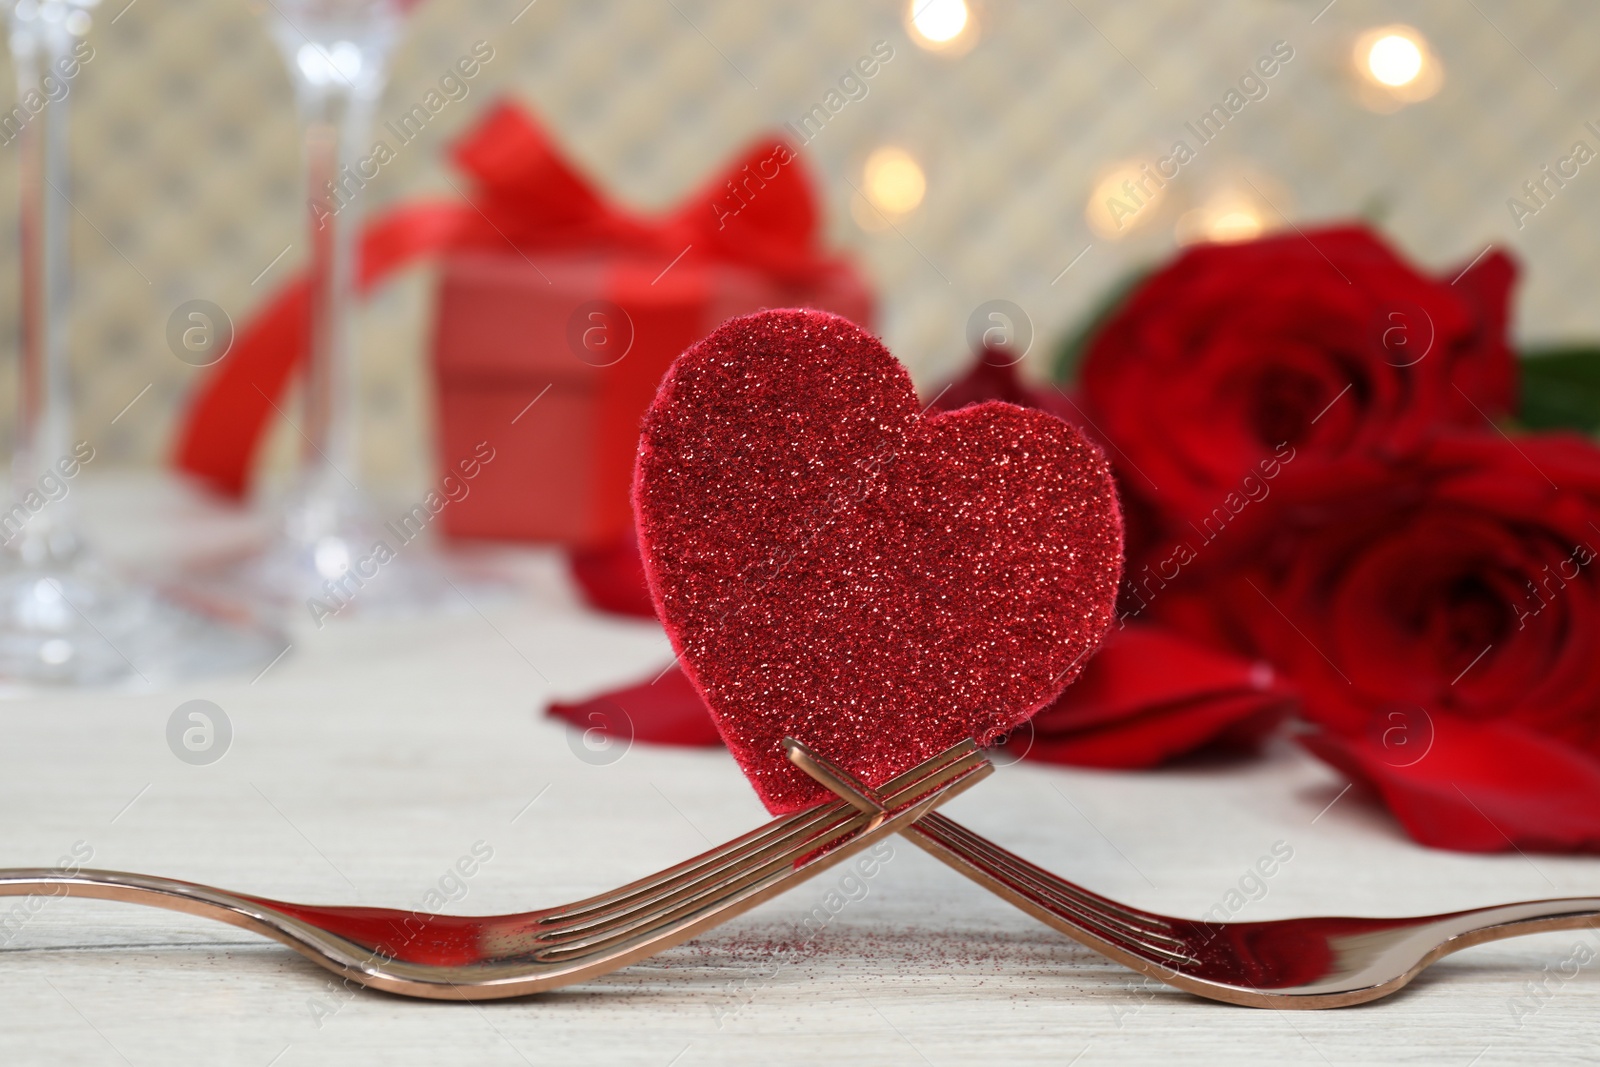 Photo of Forks and decorative heart on white table. Romantic place setting